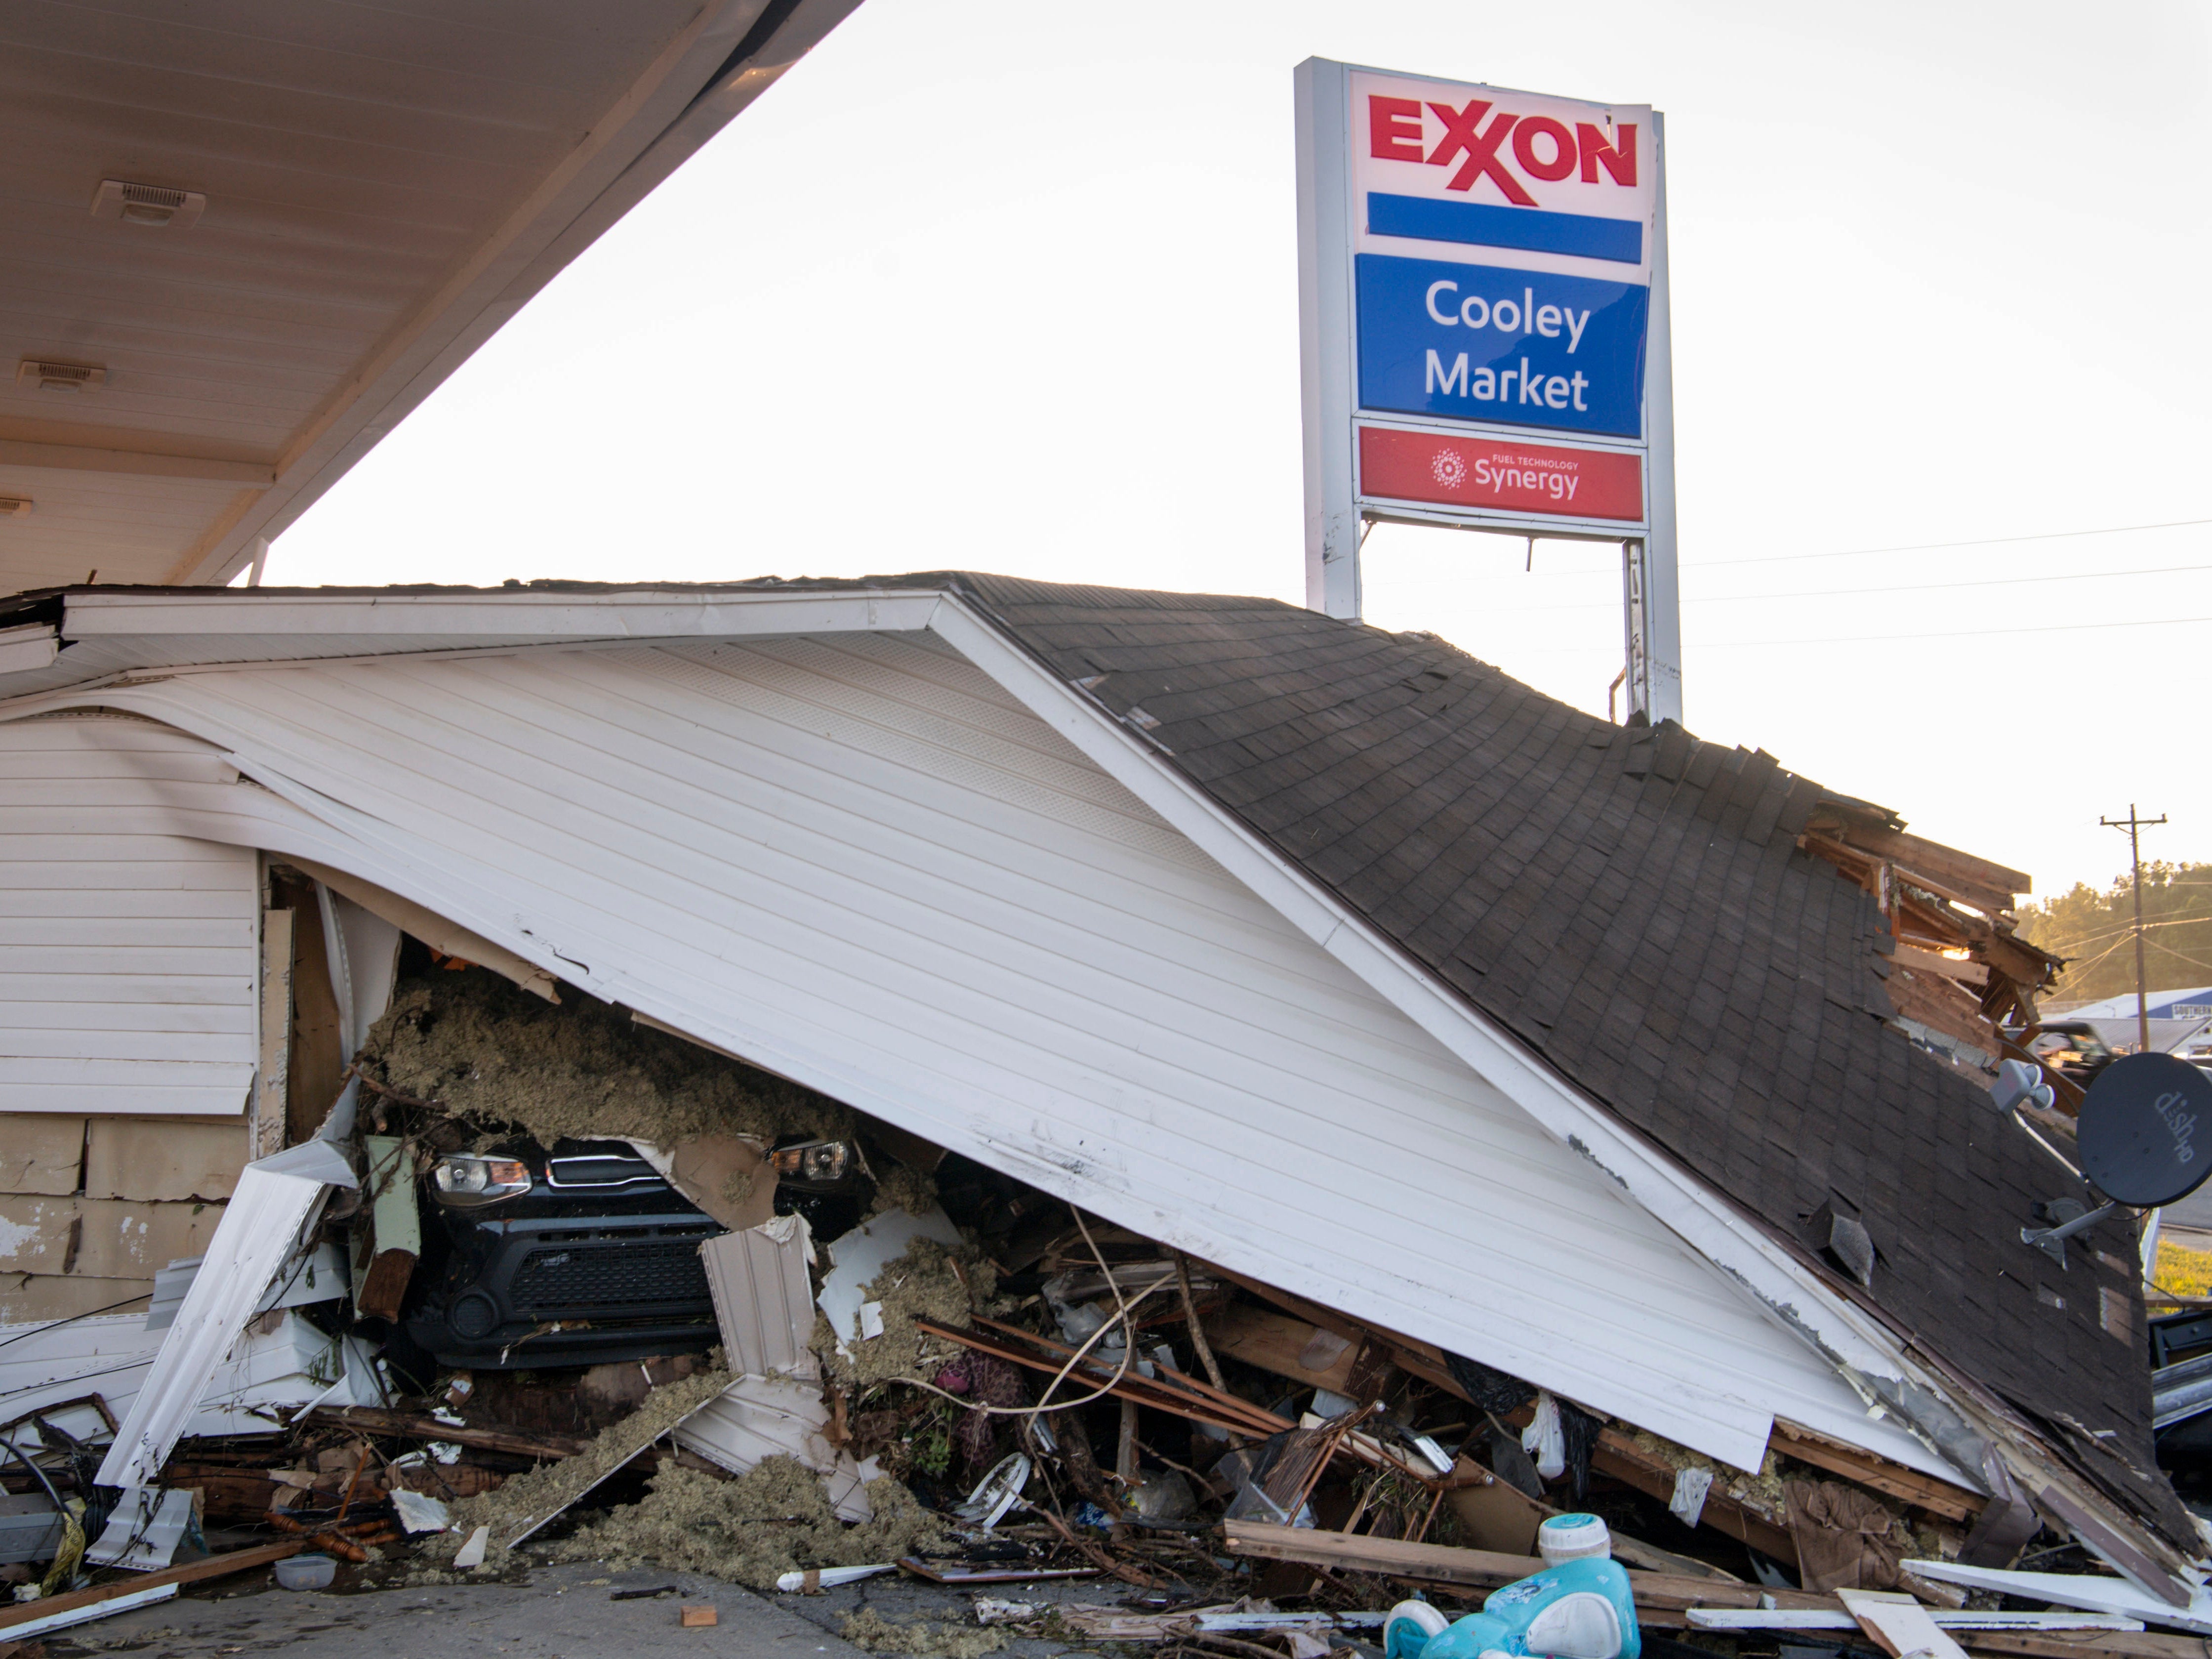 A car peeks out from under a house that was destroyed by floodwaters at the Cooley Market in Waverly, Tennessee